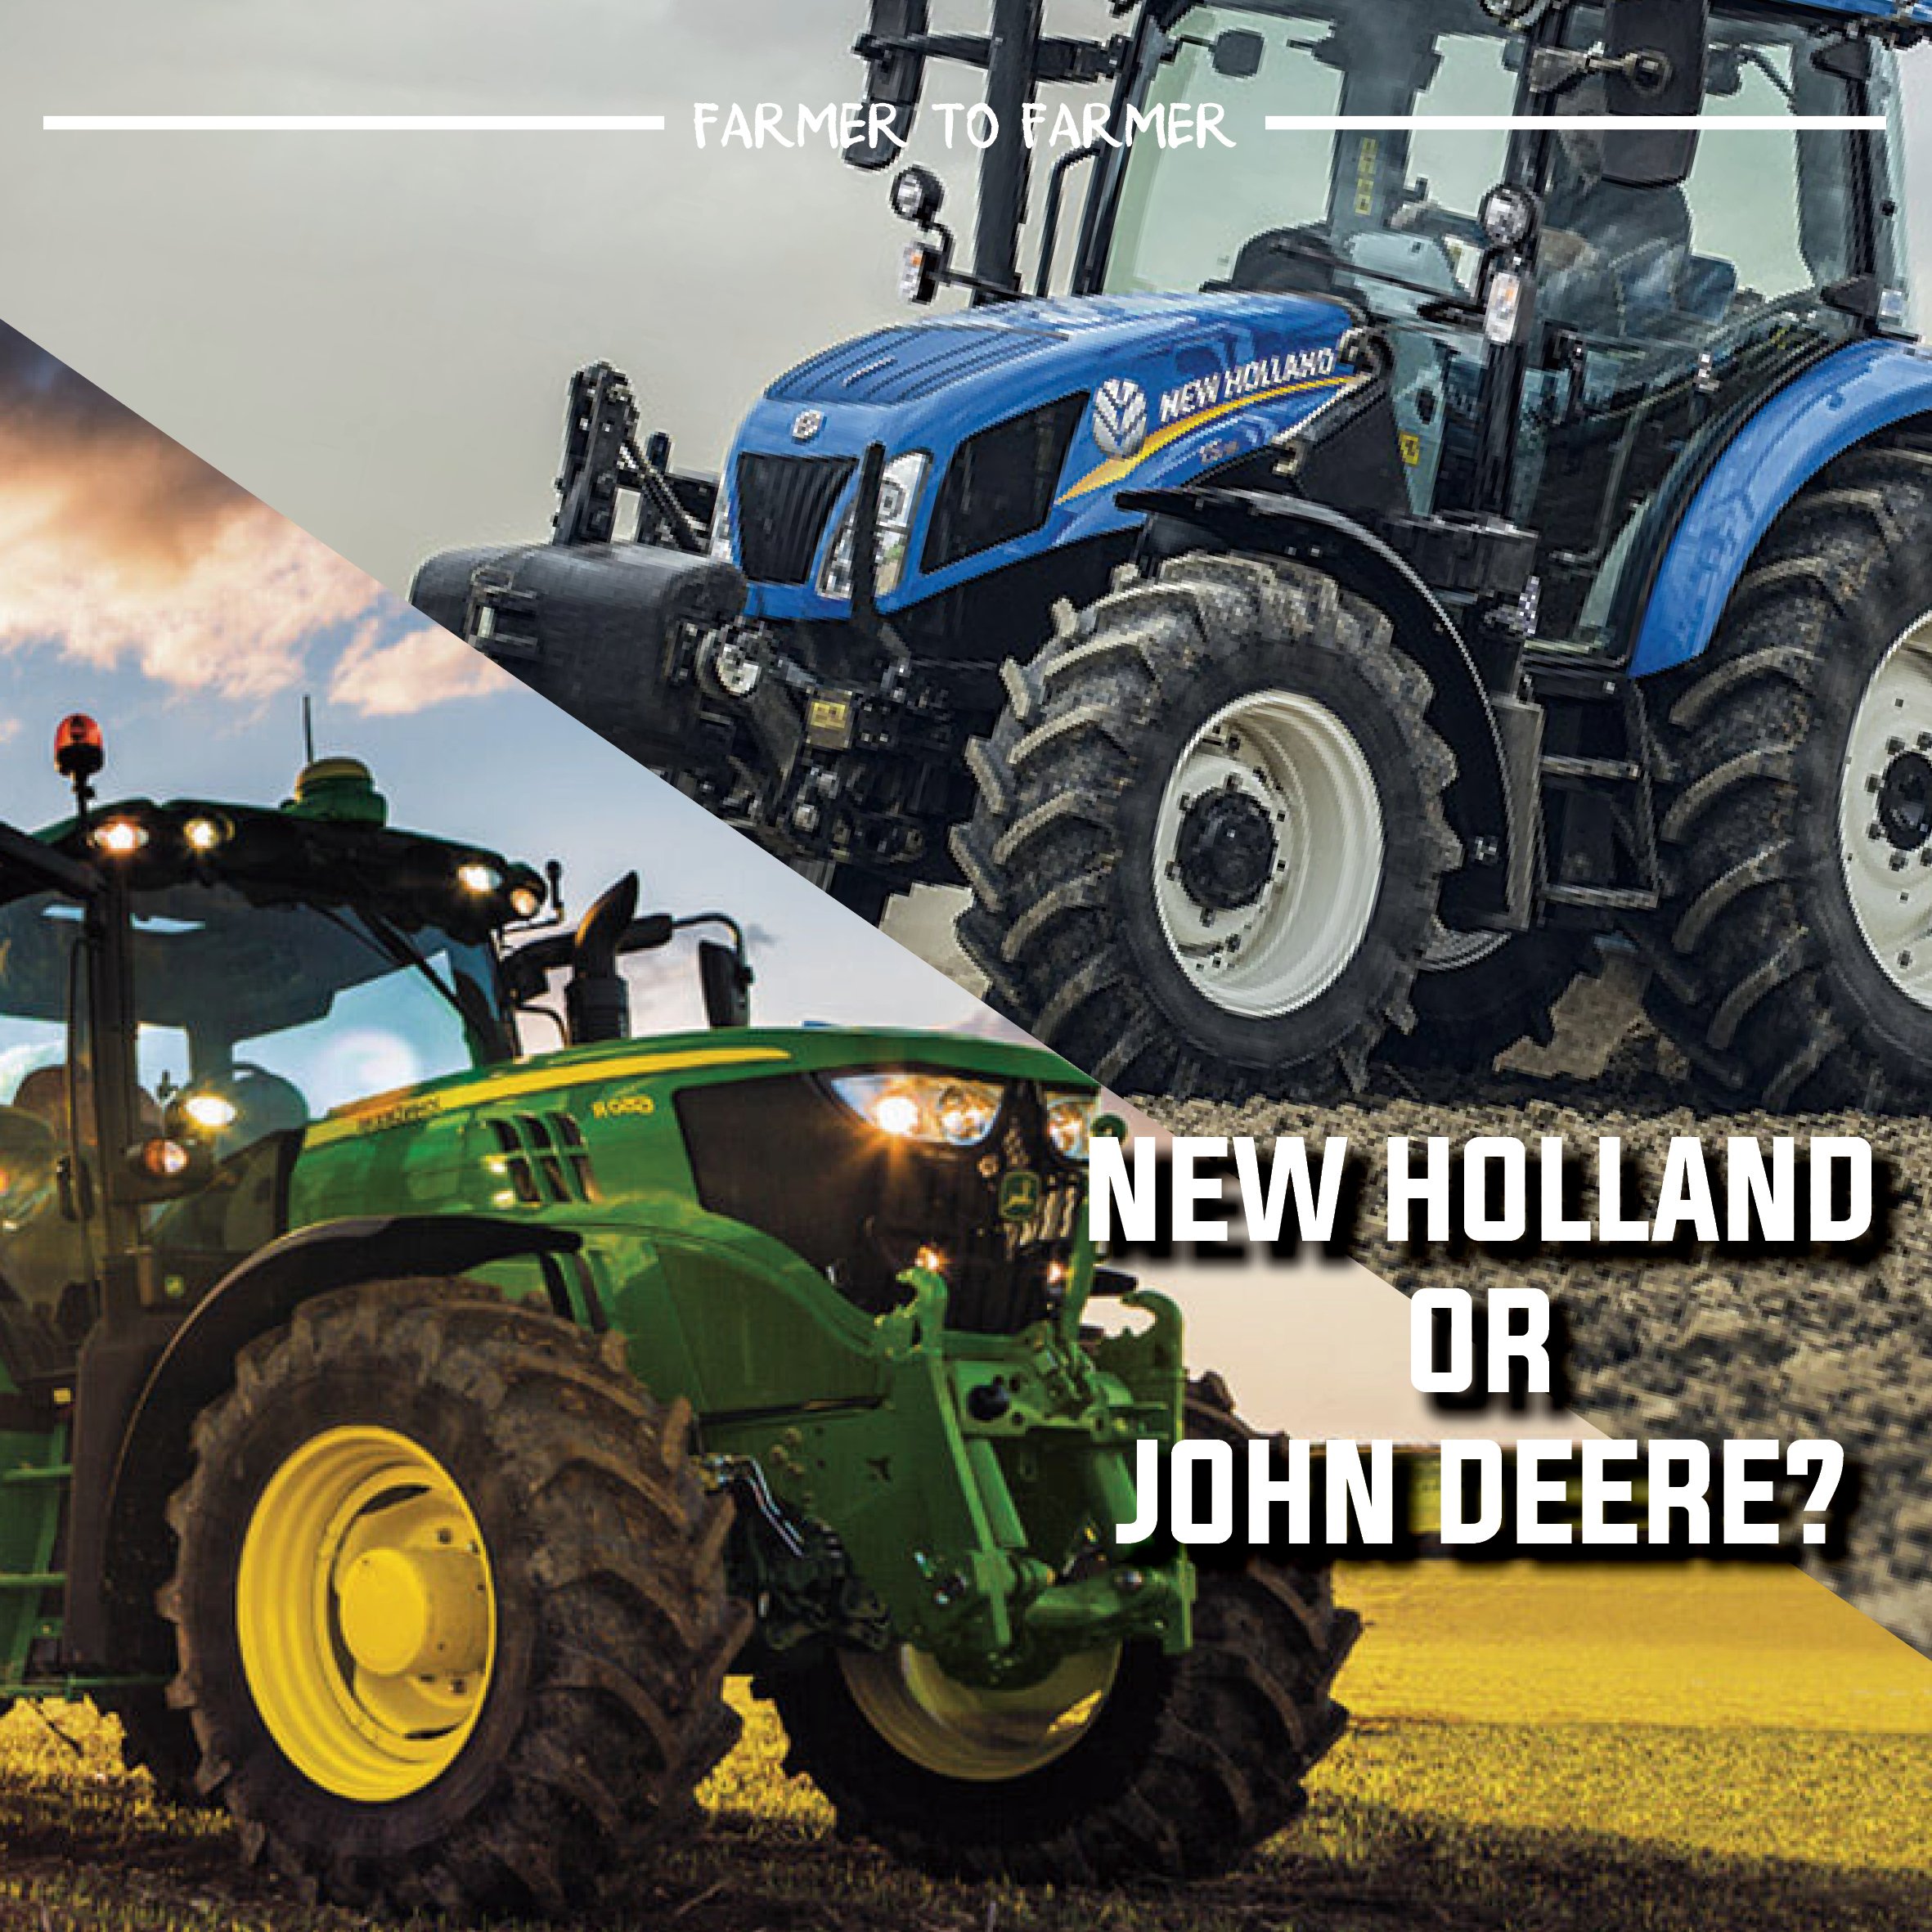 niet verwant passend constant Farmer to Farmer AU on Twitter: "New holland or John deere?! Comment  below✍🏻 . . 📷Photo credits to: @johndeere @newhollandag #farming #farm  #farmlife #johndeere #machinery #newholland #baler #tractor #potd  #photography #agriculture #hay #